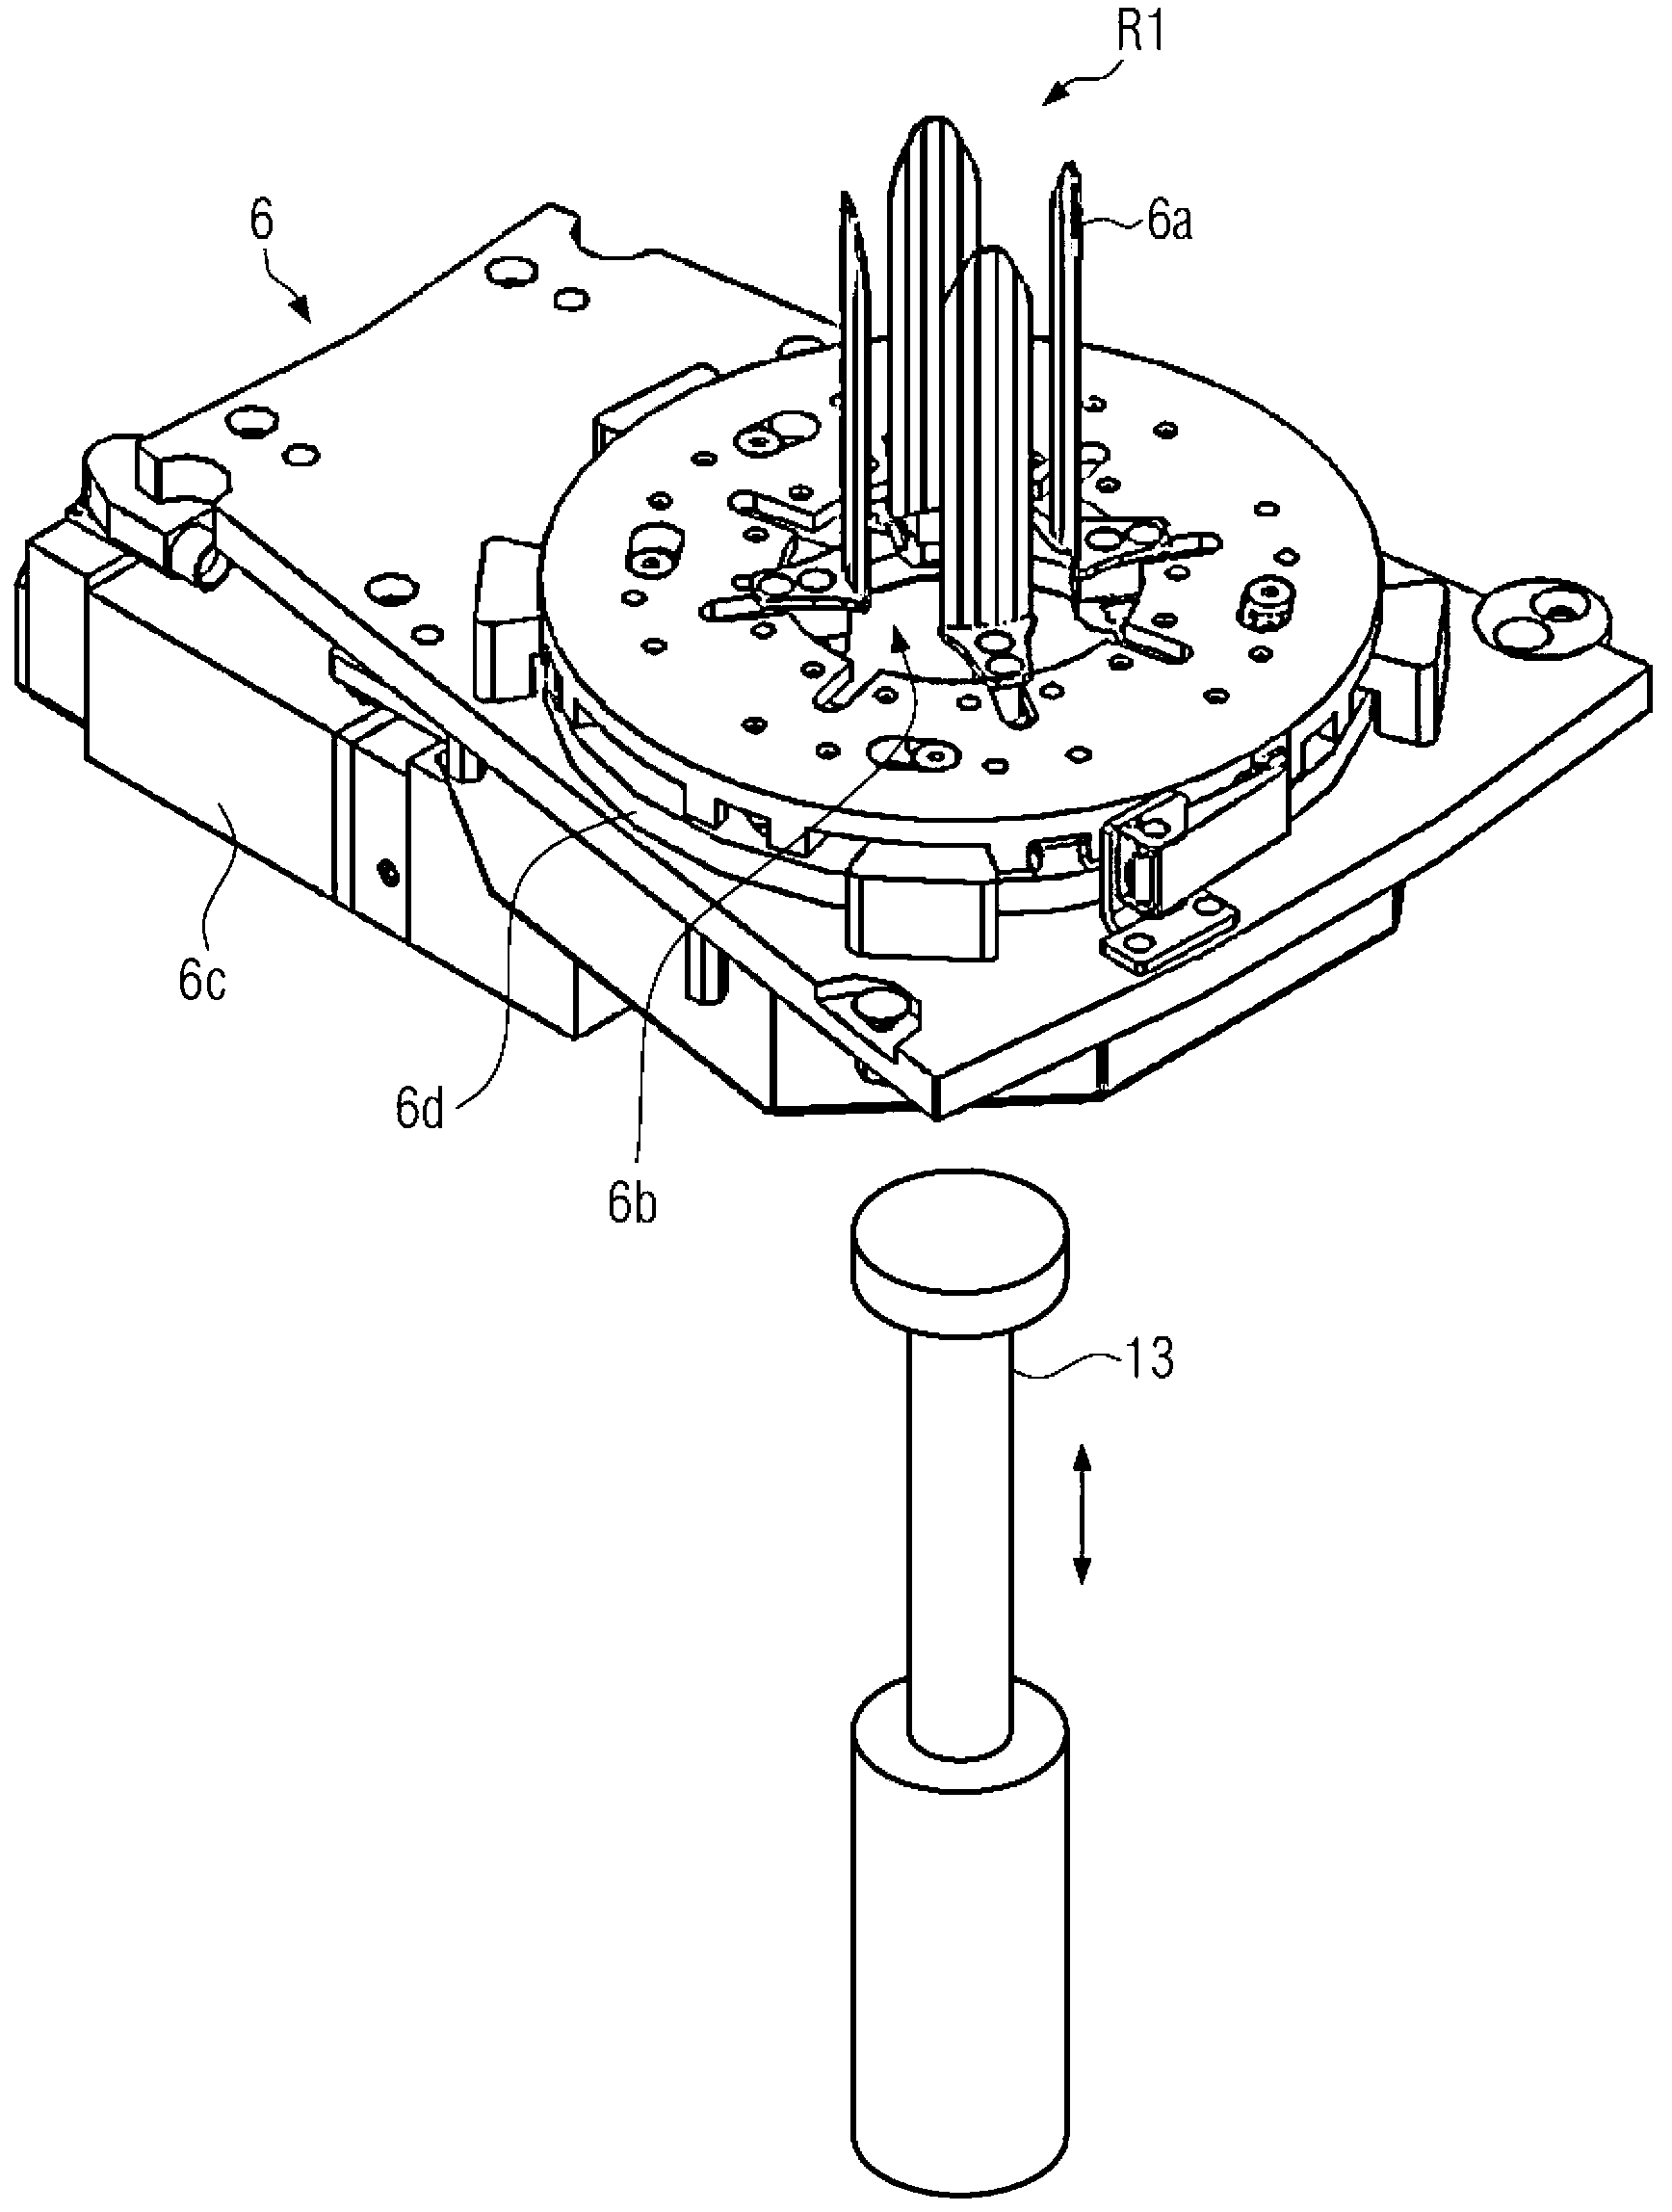 Method and device for labelling containers with sleeve-labels